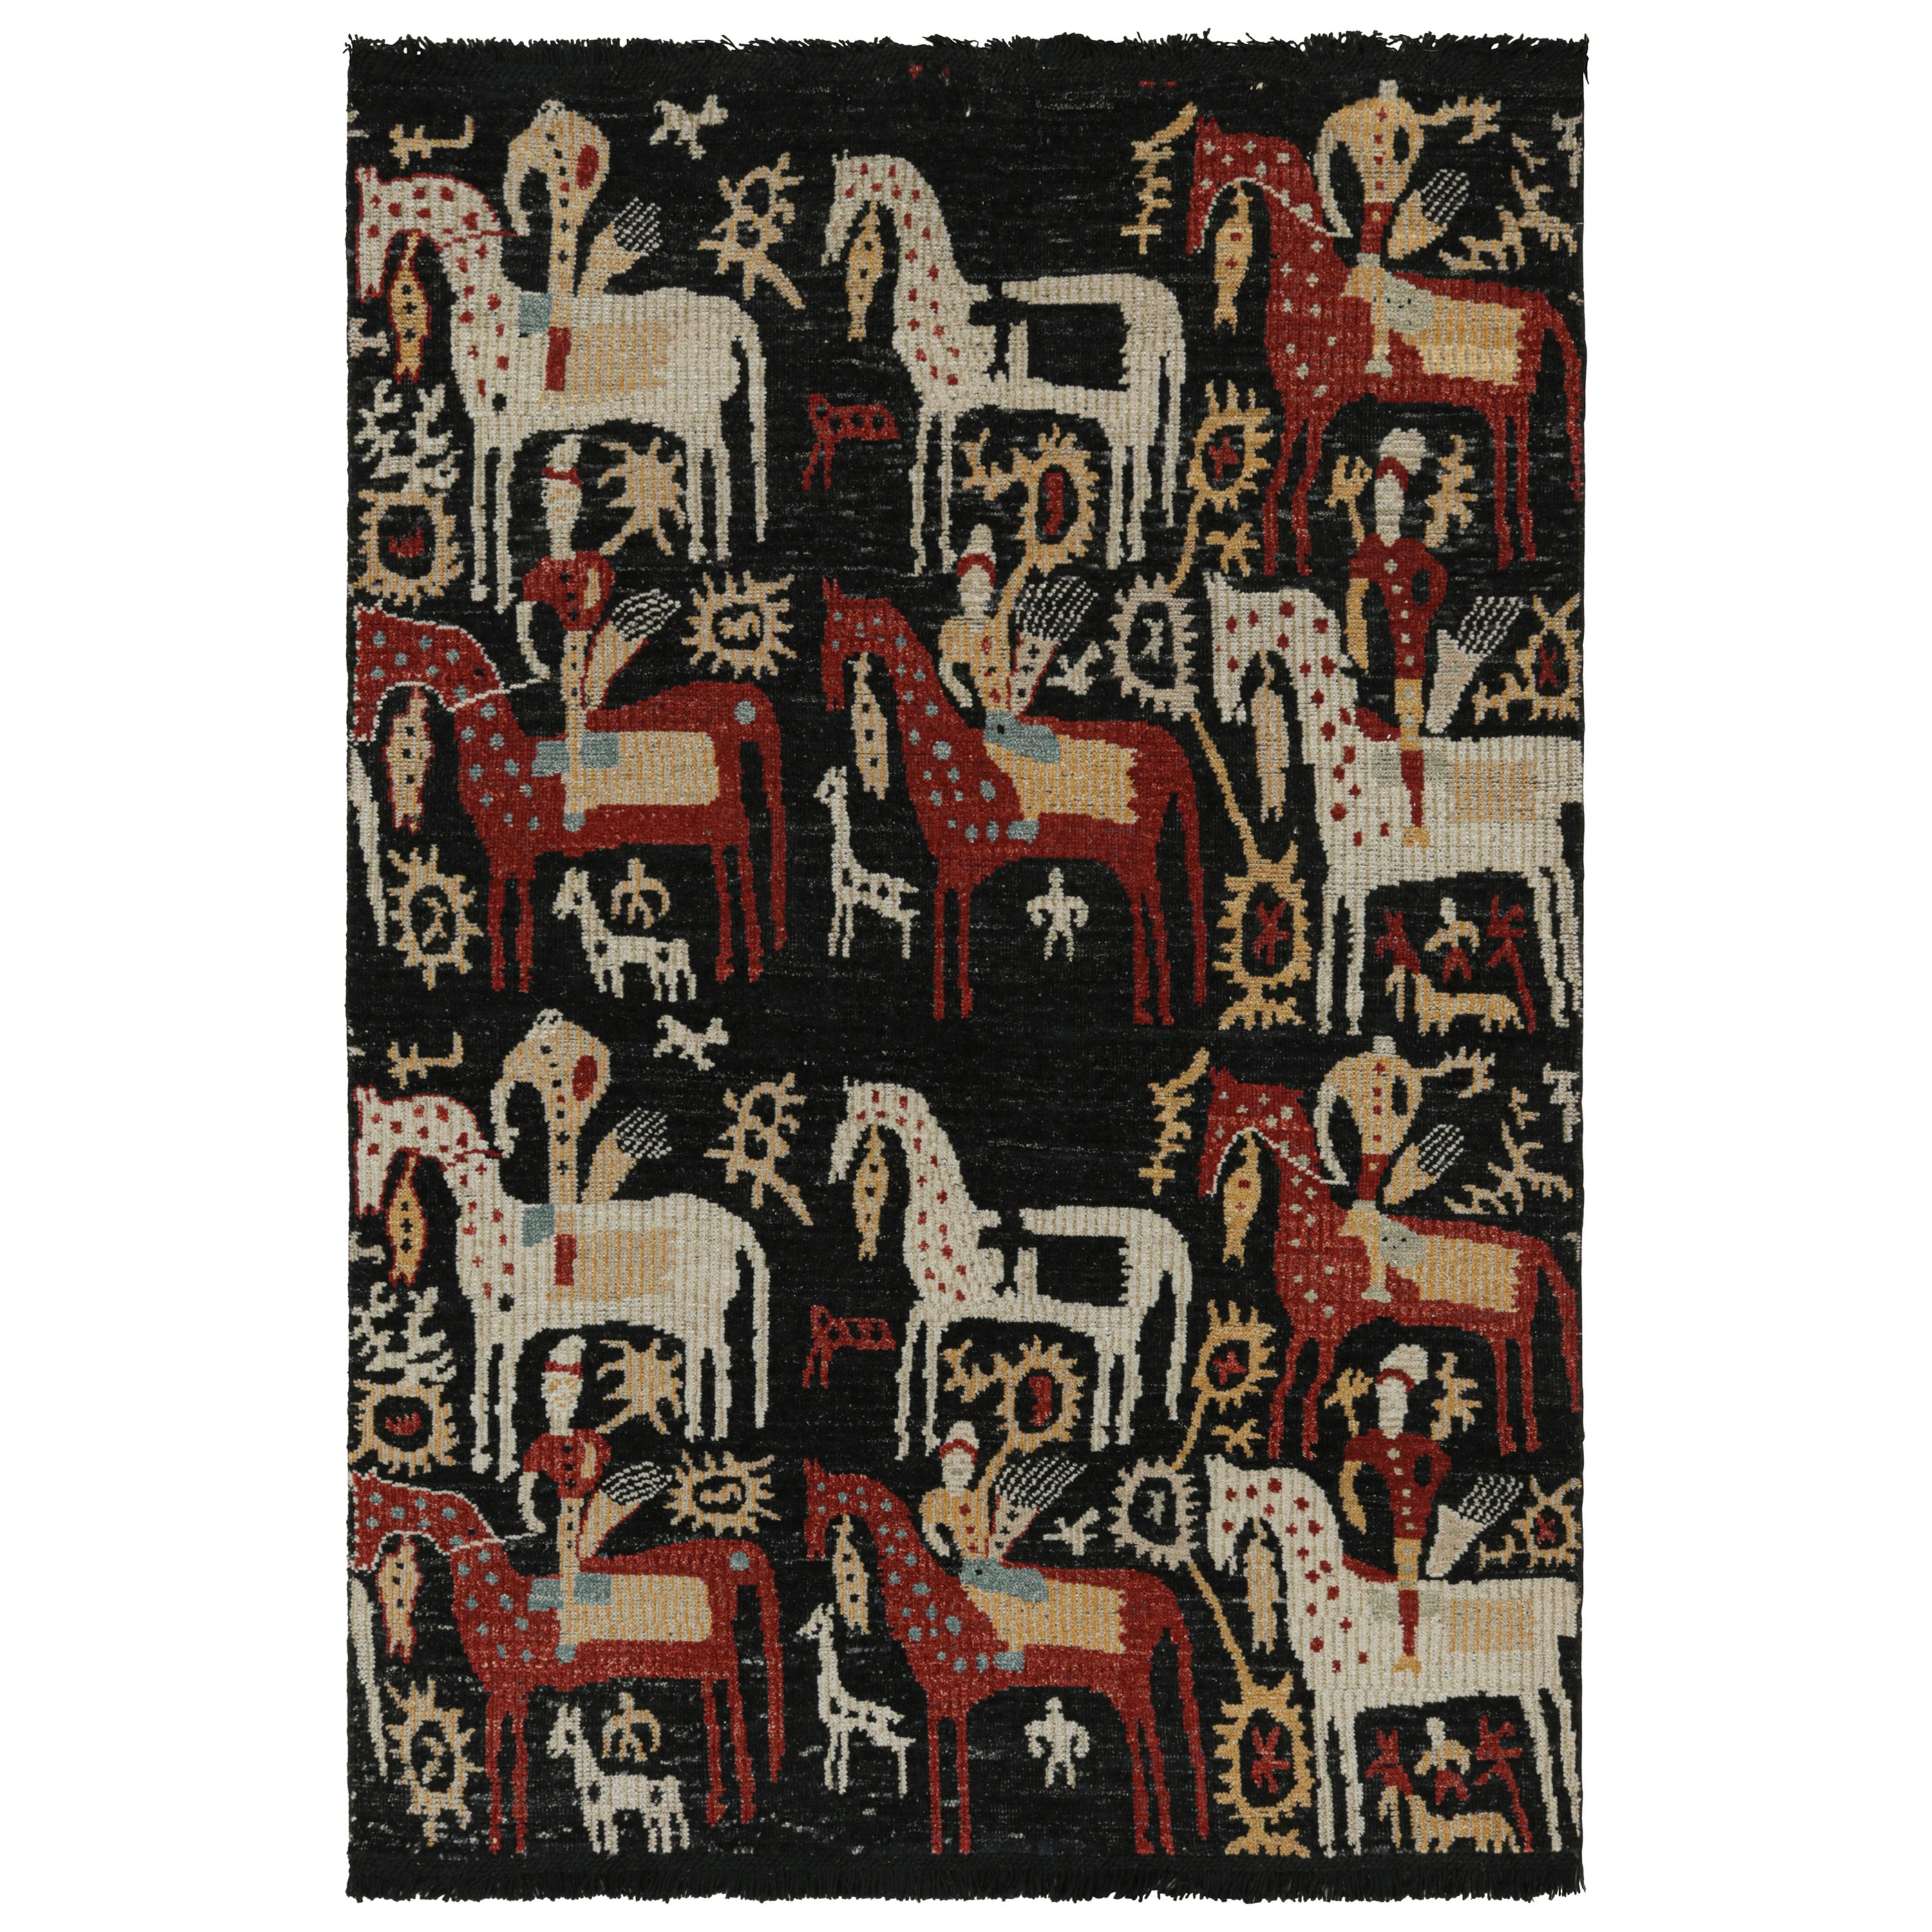 Rug & Kilim’s Caucasian-Style Rug in Black with Horseback Rider Pictorials For Sale